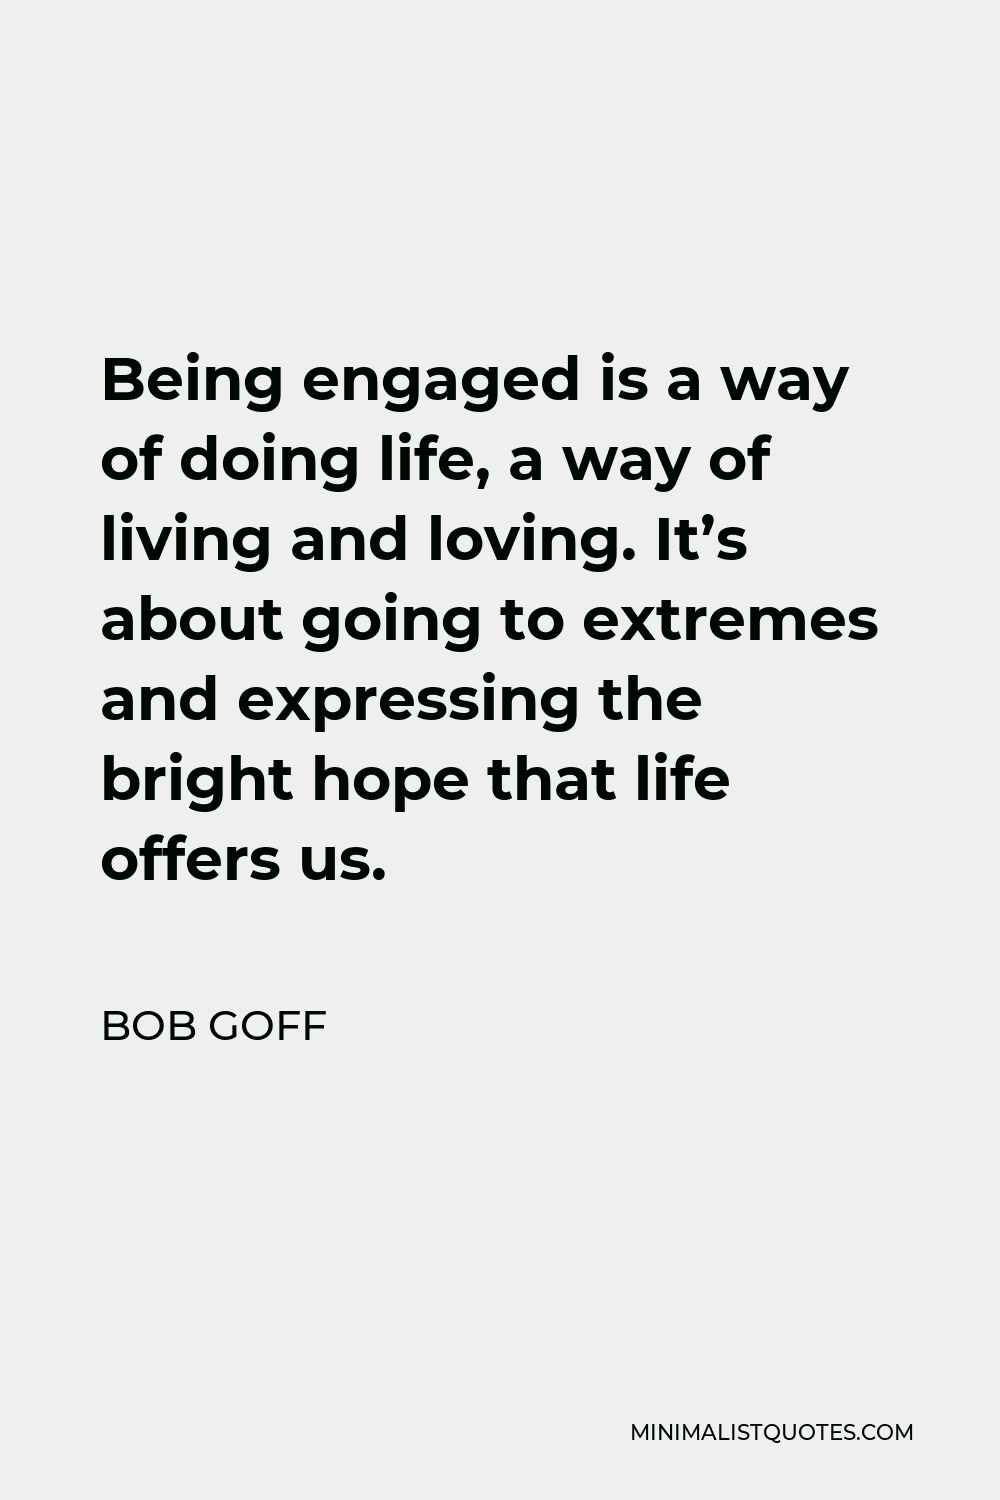 Bob Goff Quote - Being engaged is a way of doing life, a way of living and loving. It’s about going to extremes and expressing the bright hope that life offers us.